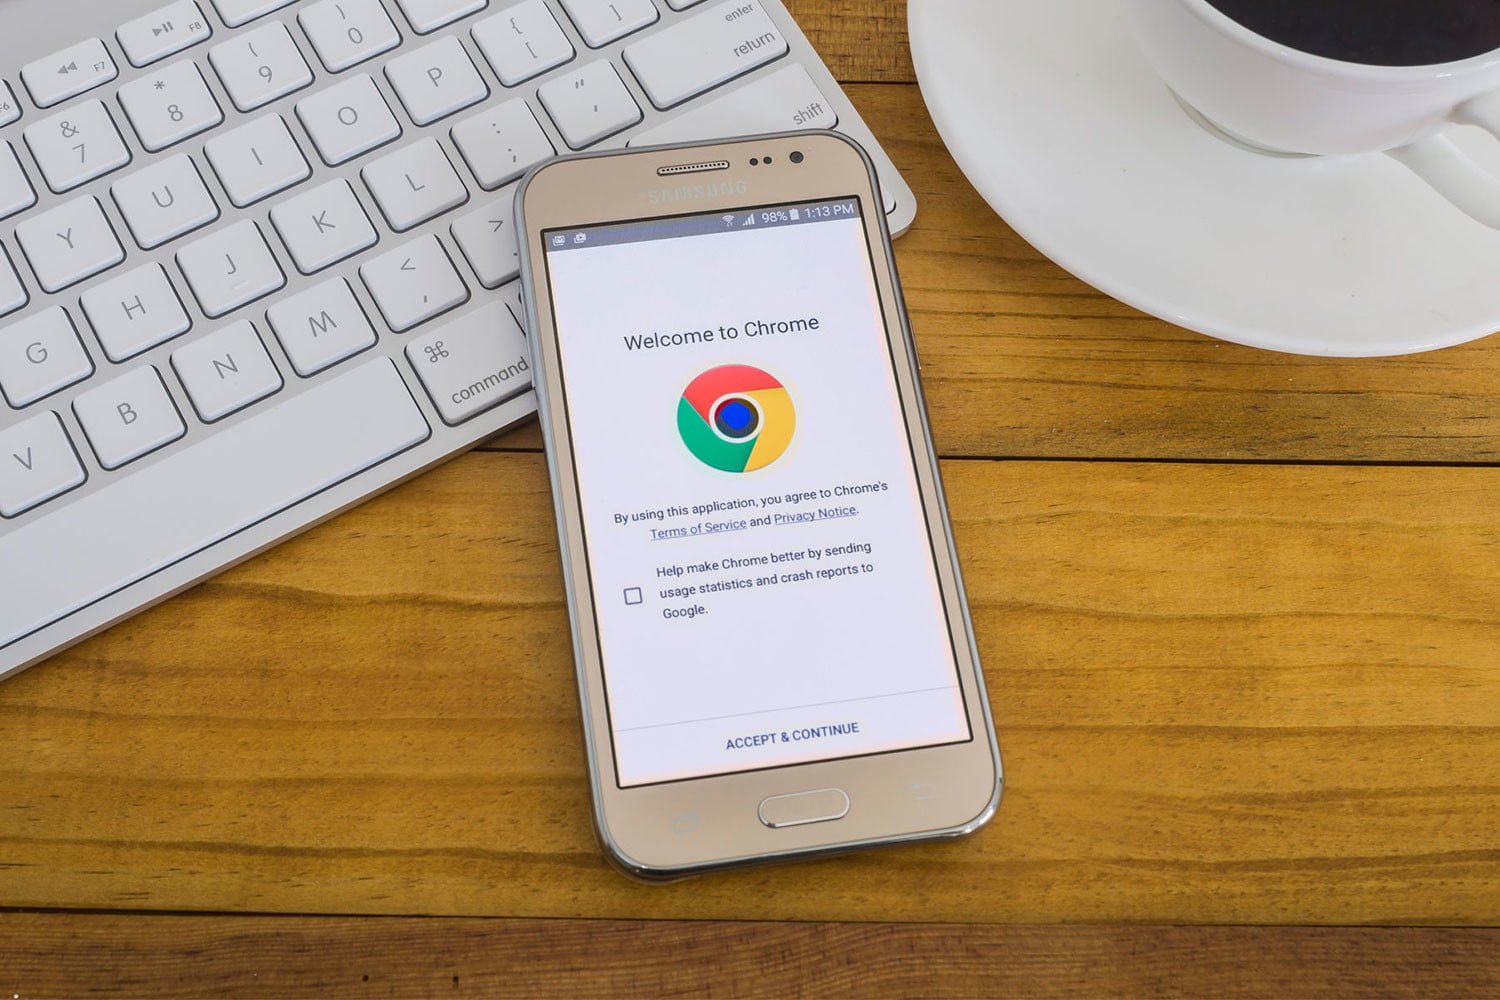 Google wants to improve the integration of Chrome with antivirus